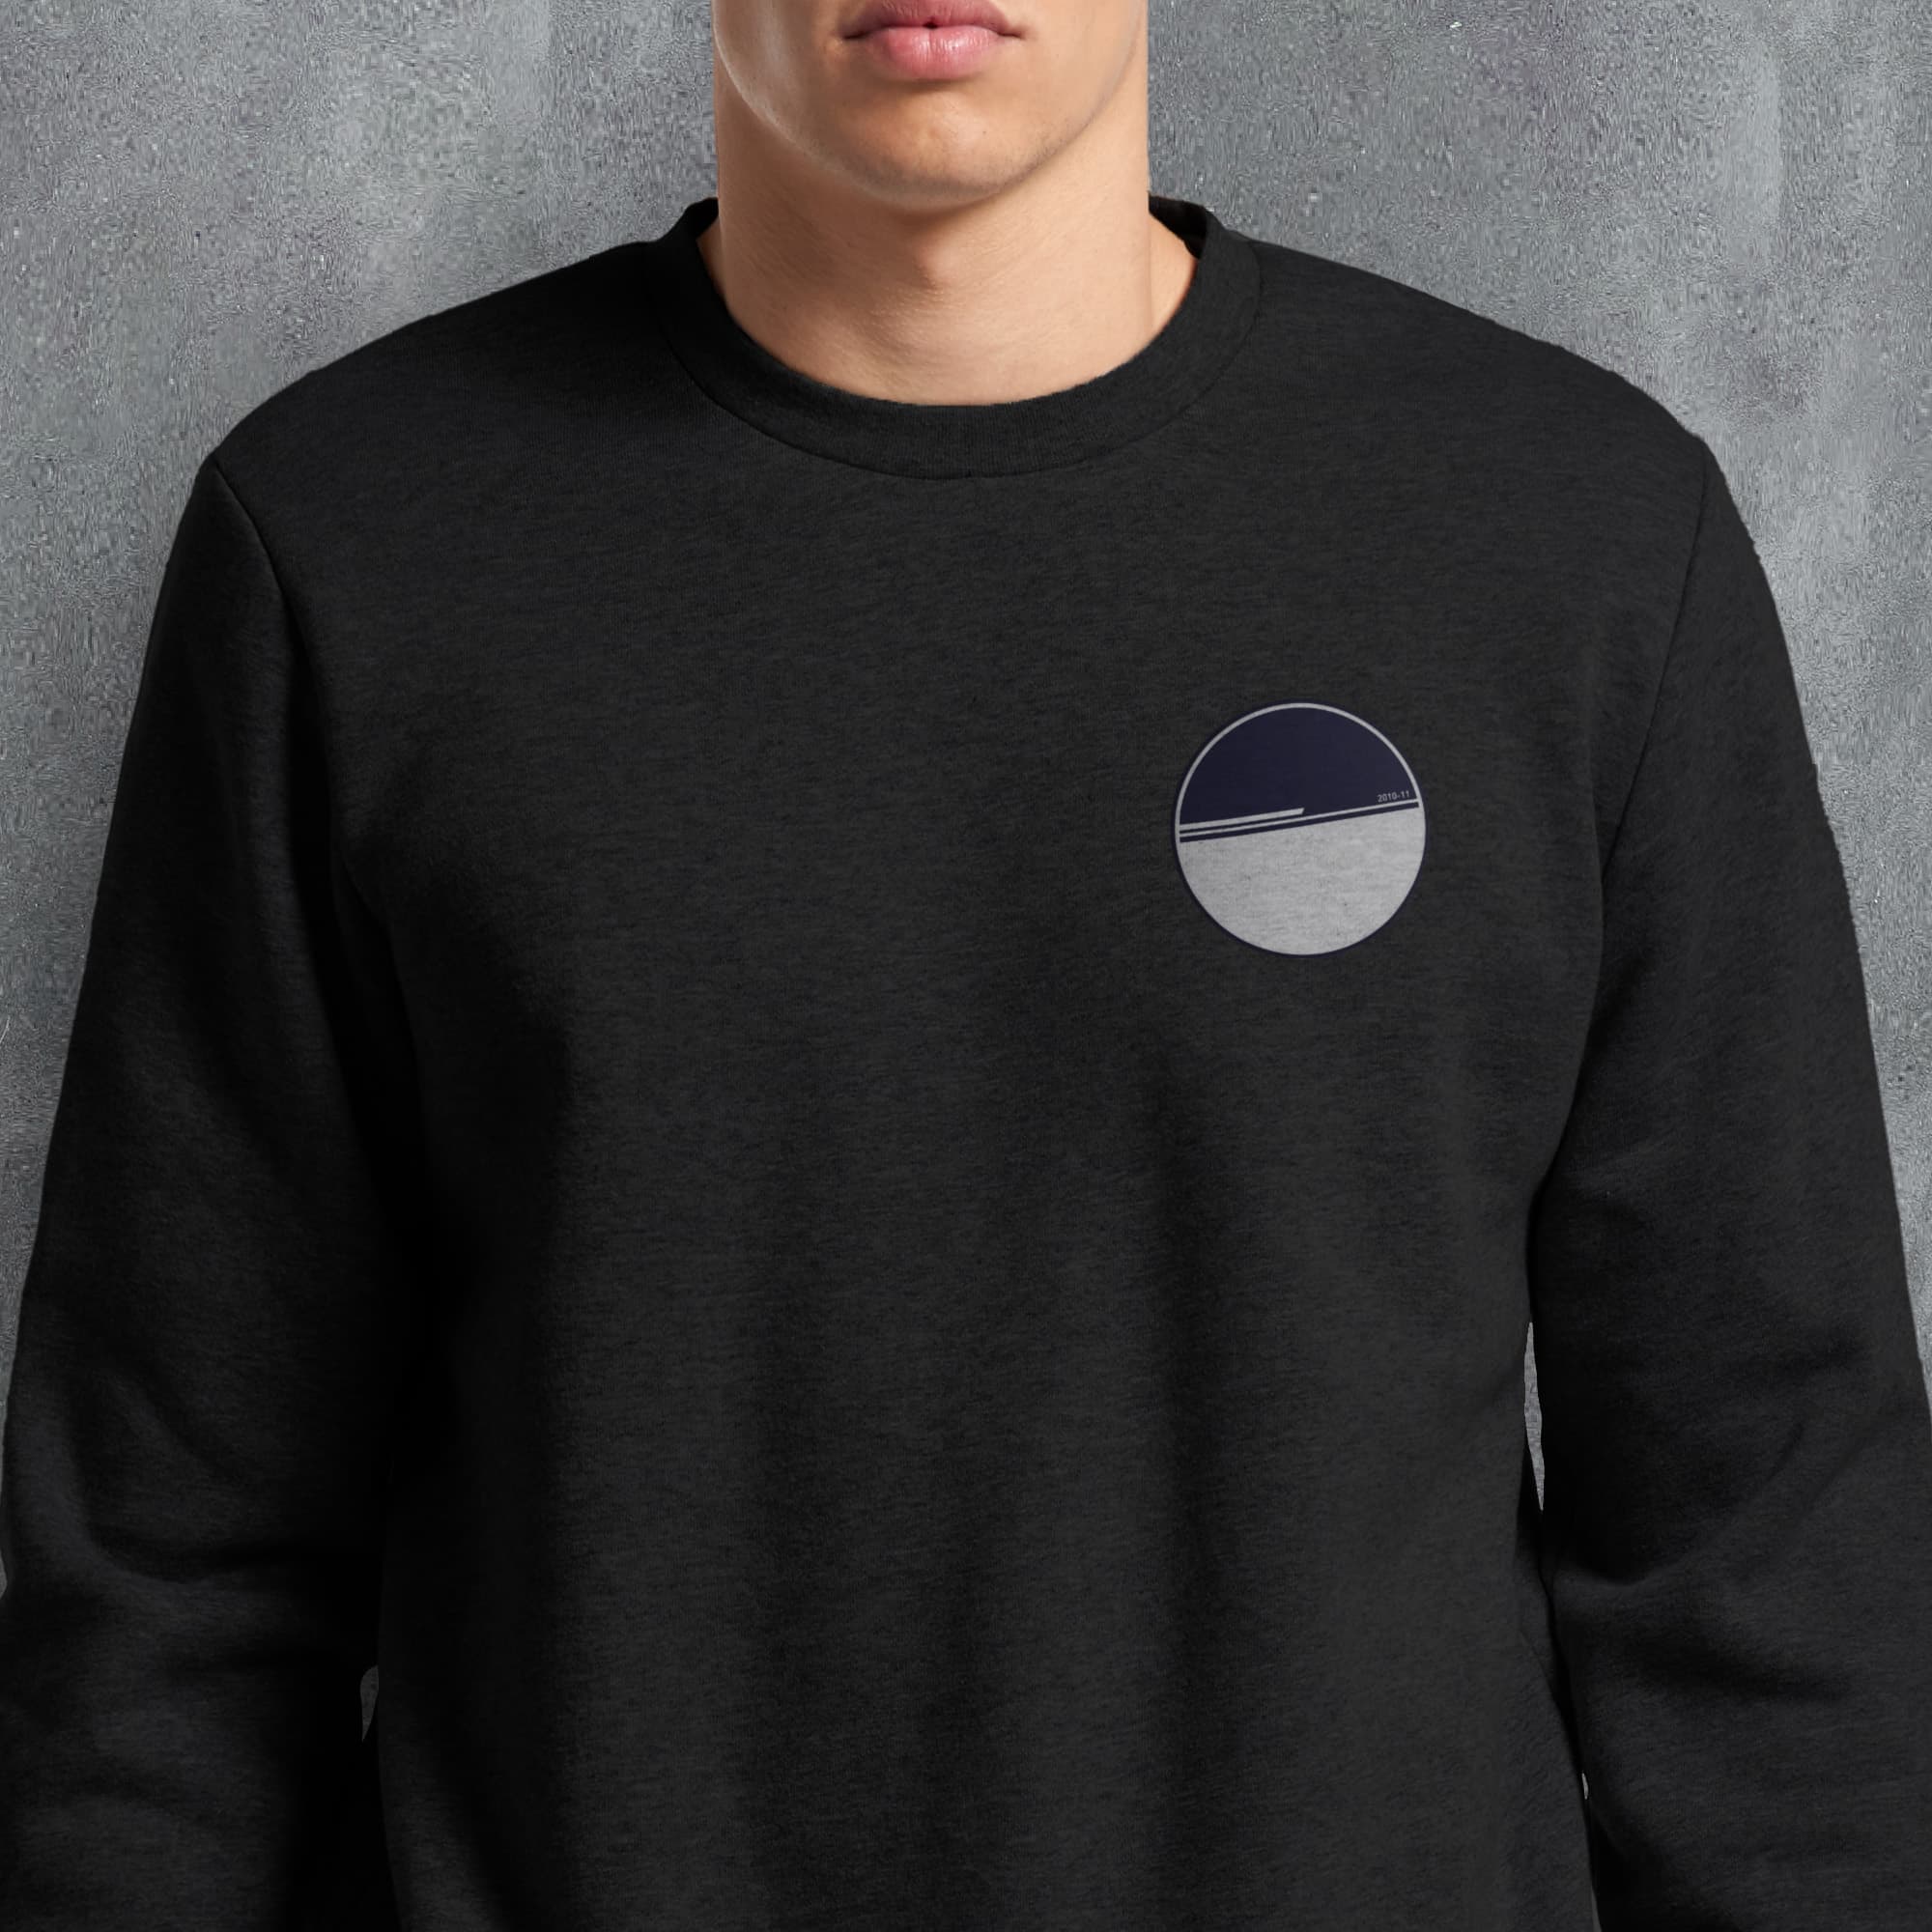 a man wearing a black sweatshirt with a white circle on it